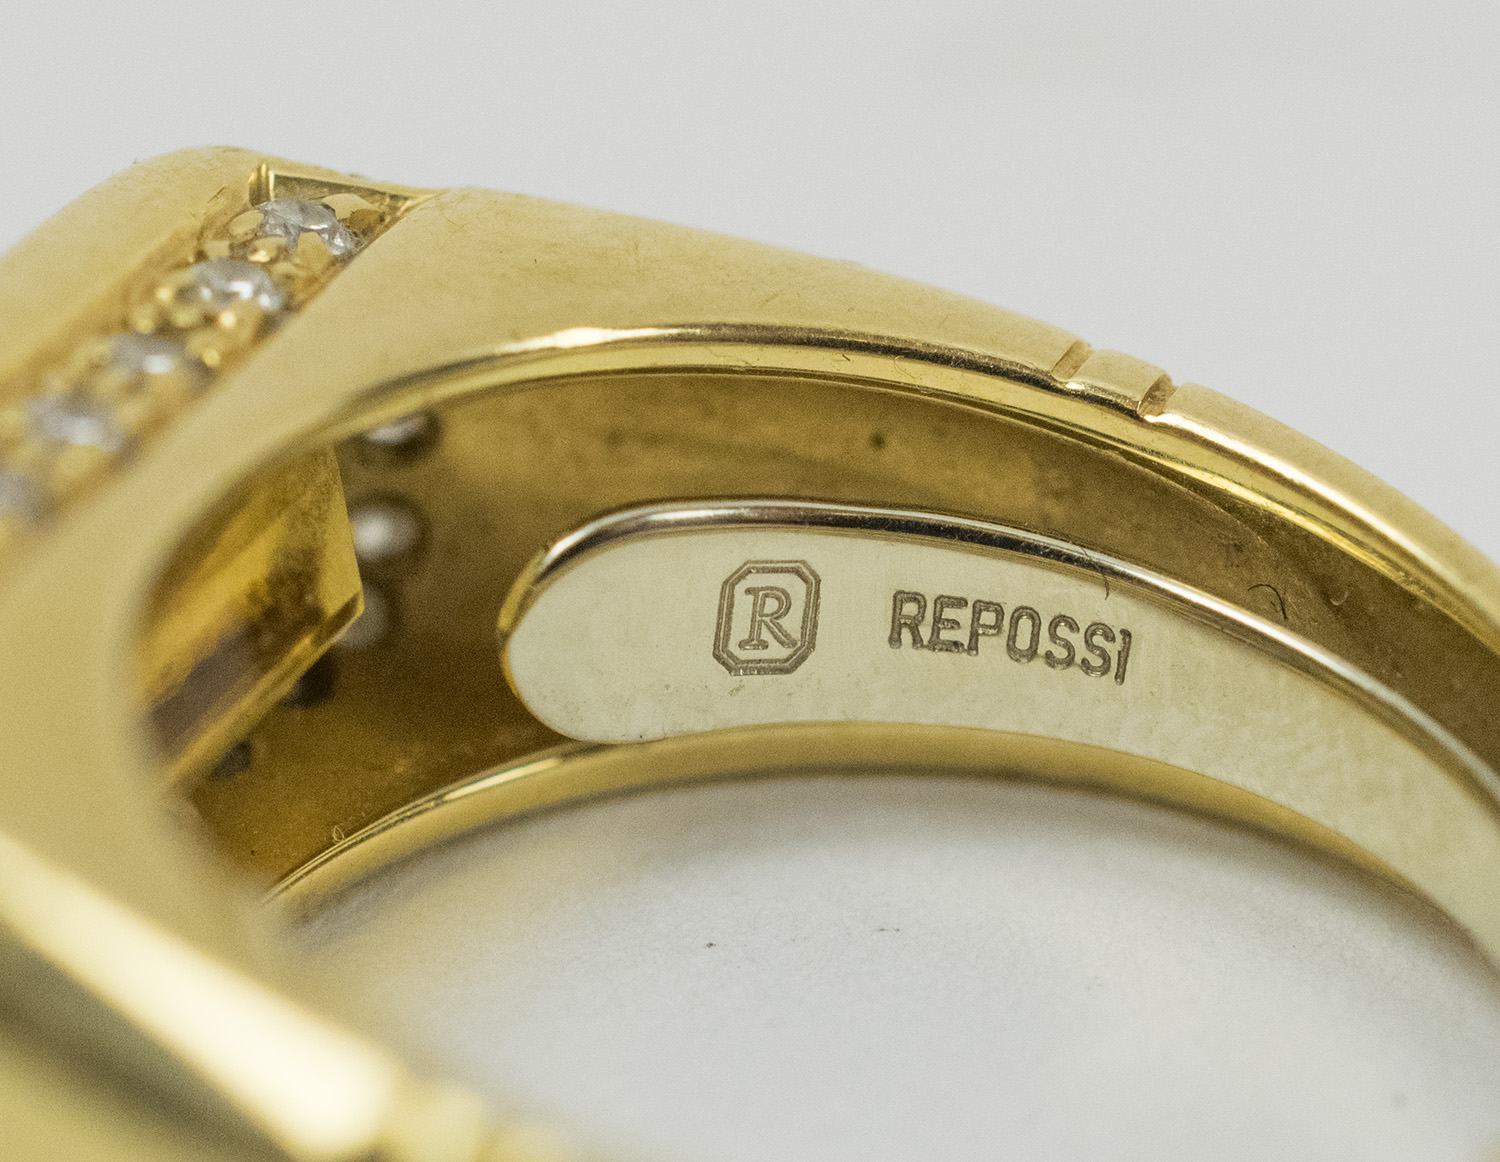 REPOSSI RING, 18K yellow gold, set a facetted citrine and diamonds.